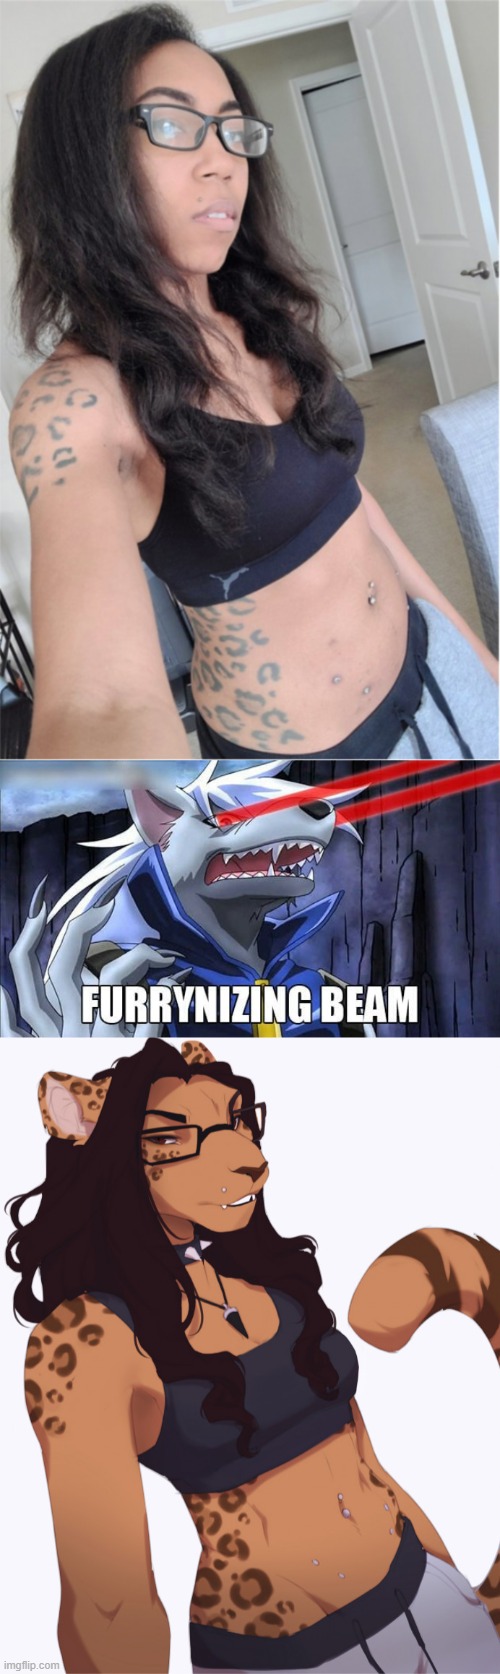 Show me something more "Flawless", I'll wait. (By Vexstacy) | image tagged in furrynizing beam,flawless,memes,furry,perfect | made w/ Imgflip meme maker